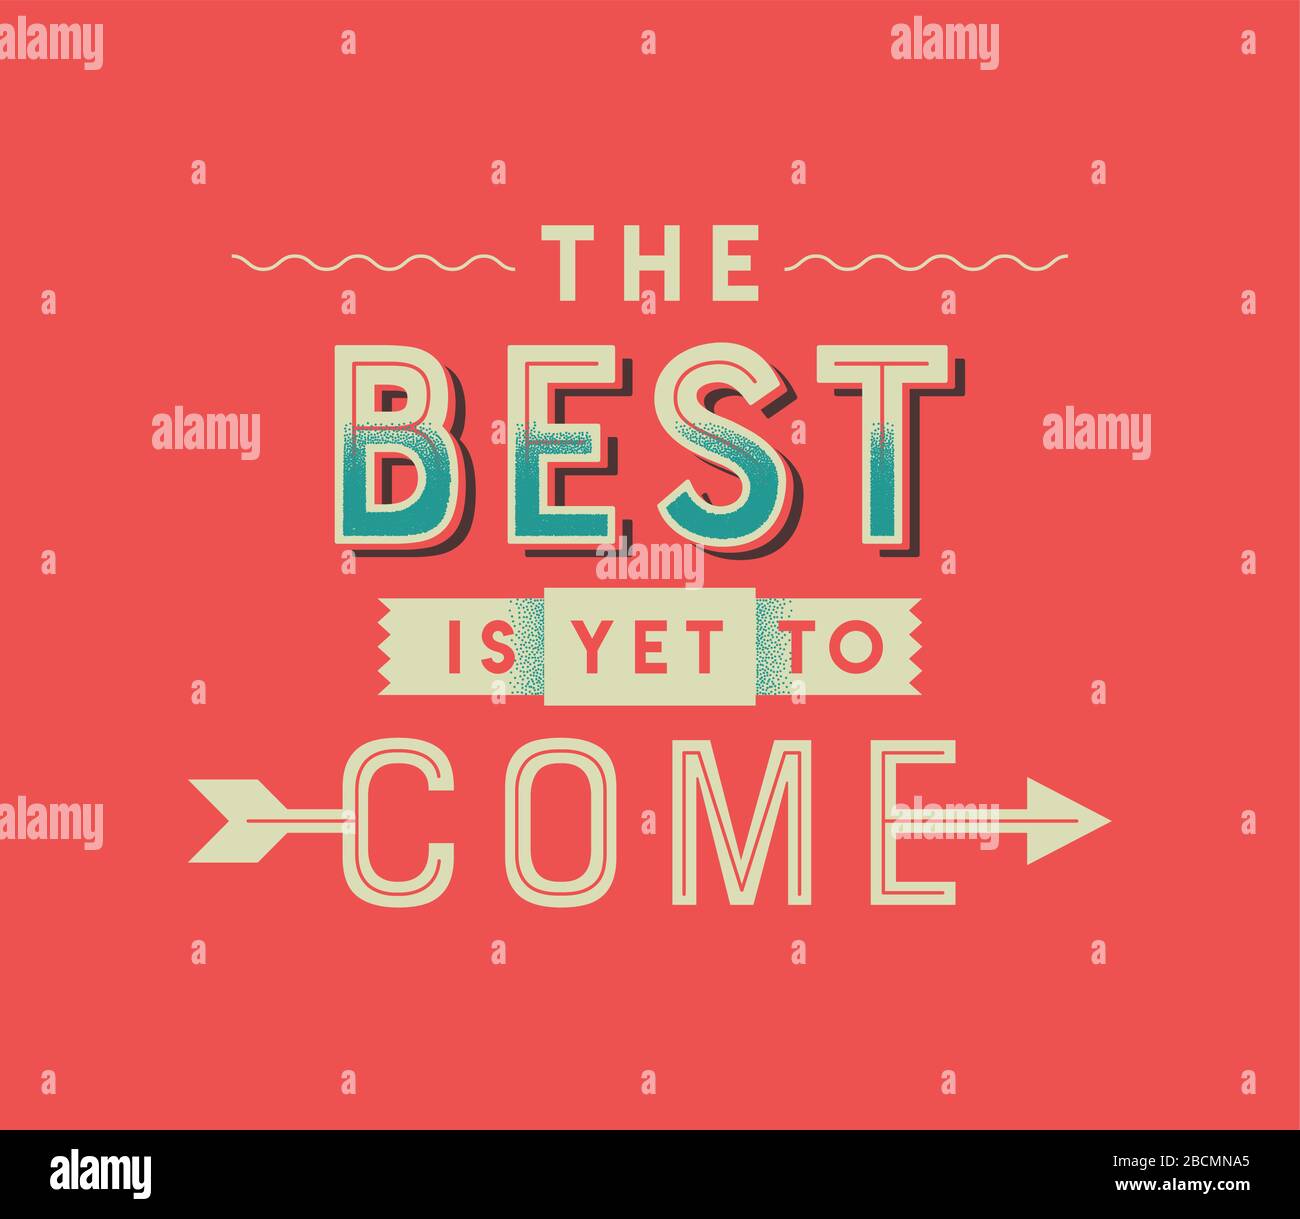 The best is yet to come typography quote poster illustration. Retro style lettering text design with motivational message for life inspiration, positi Stock Vector